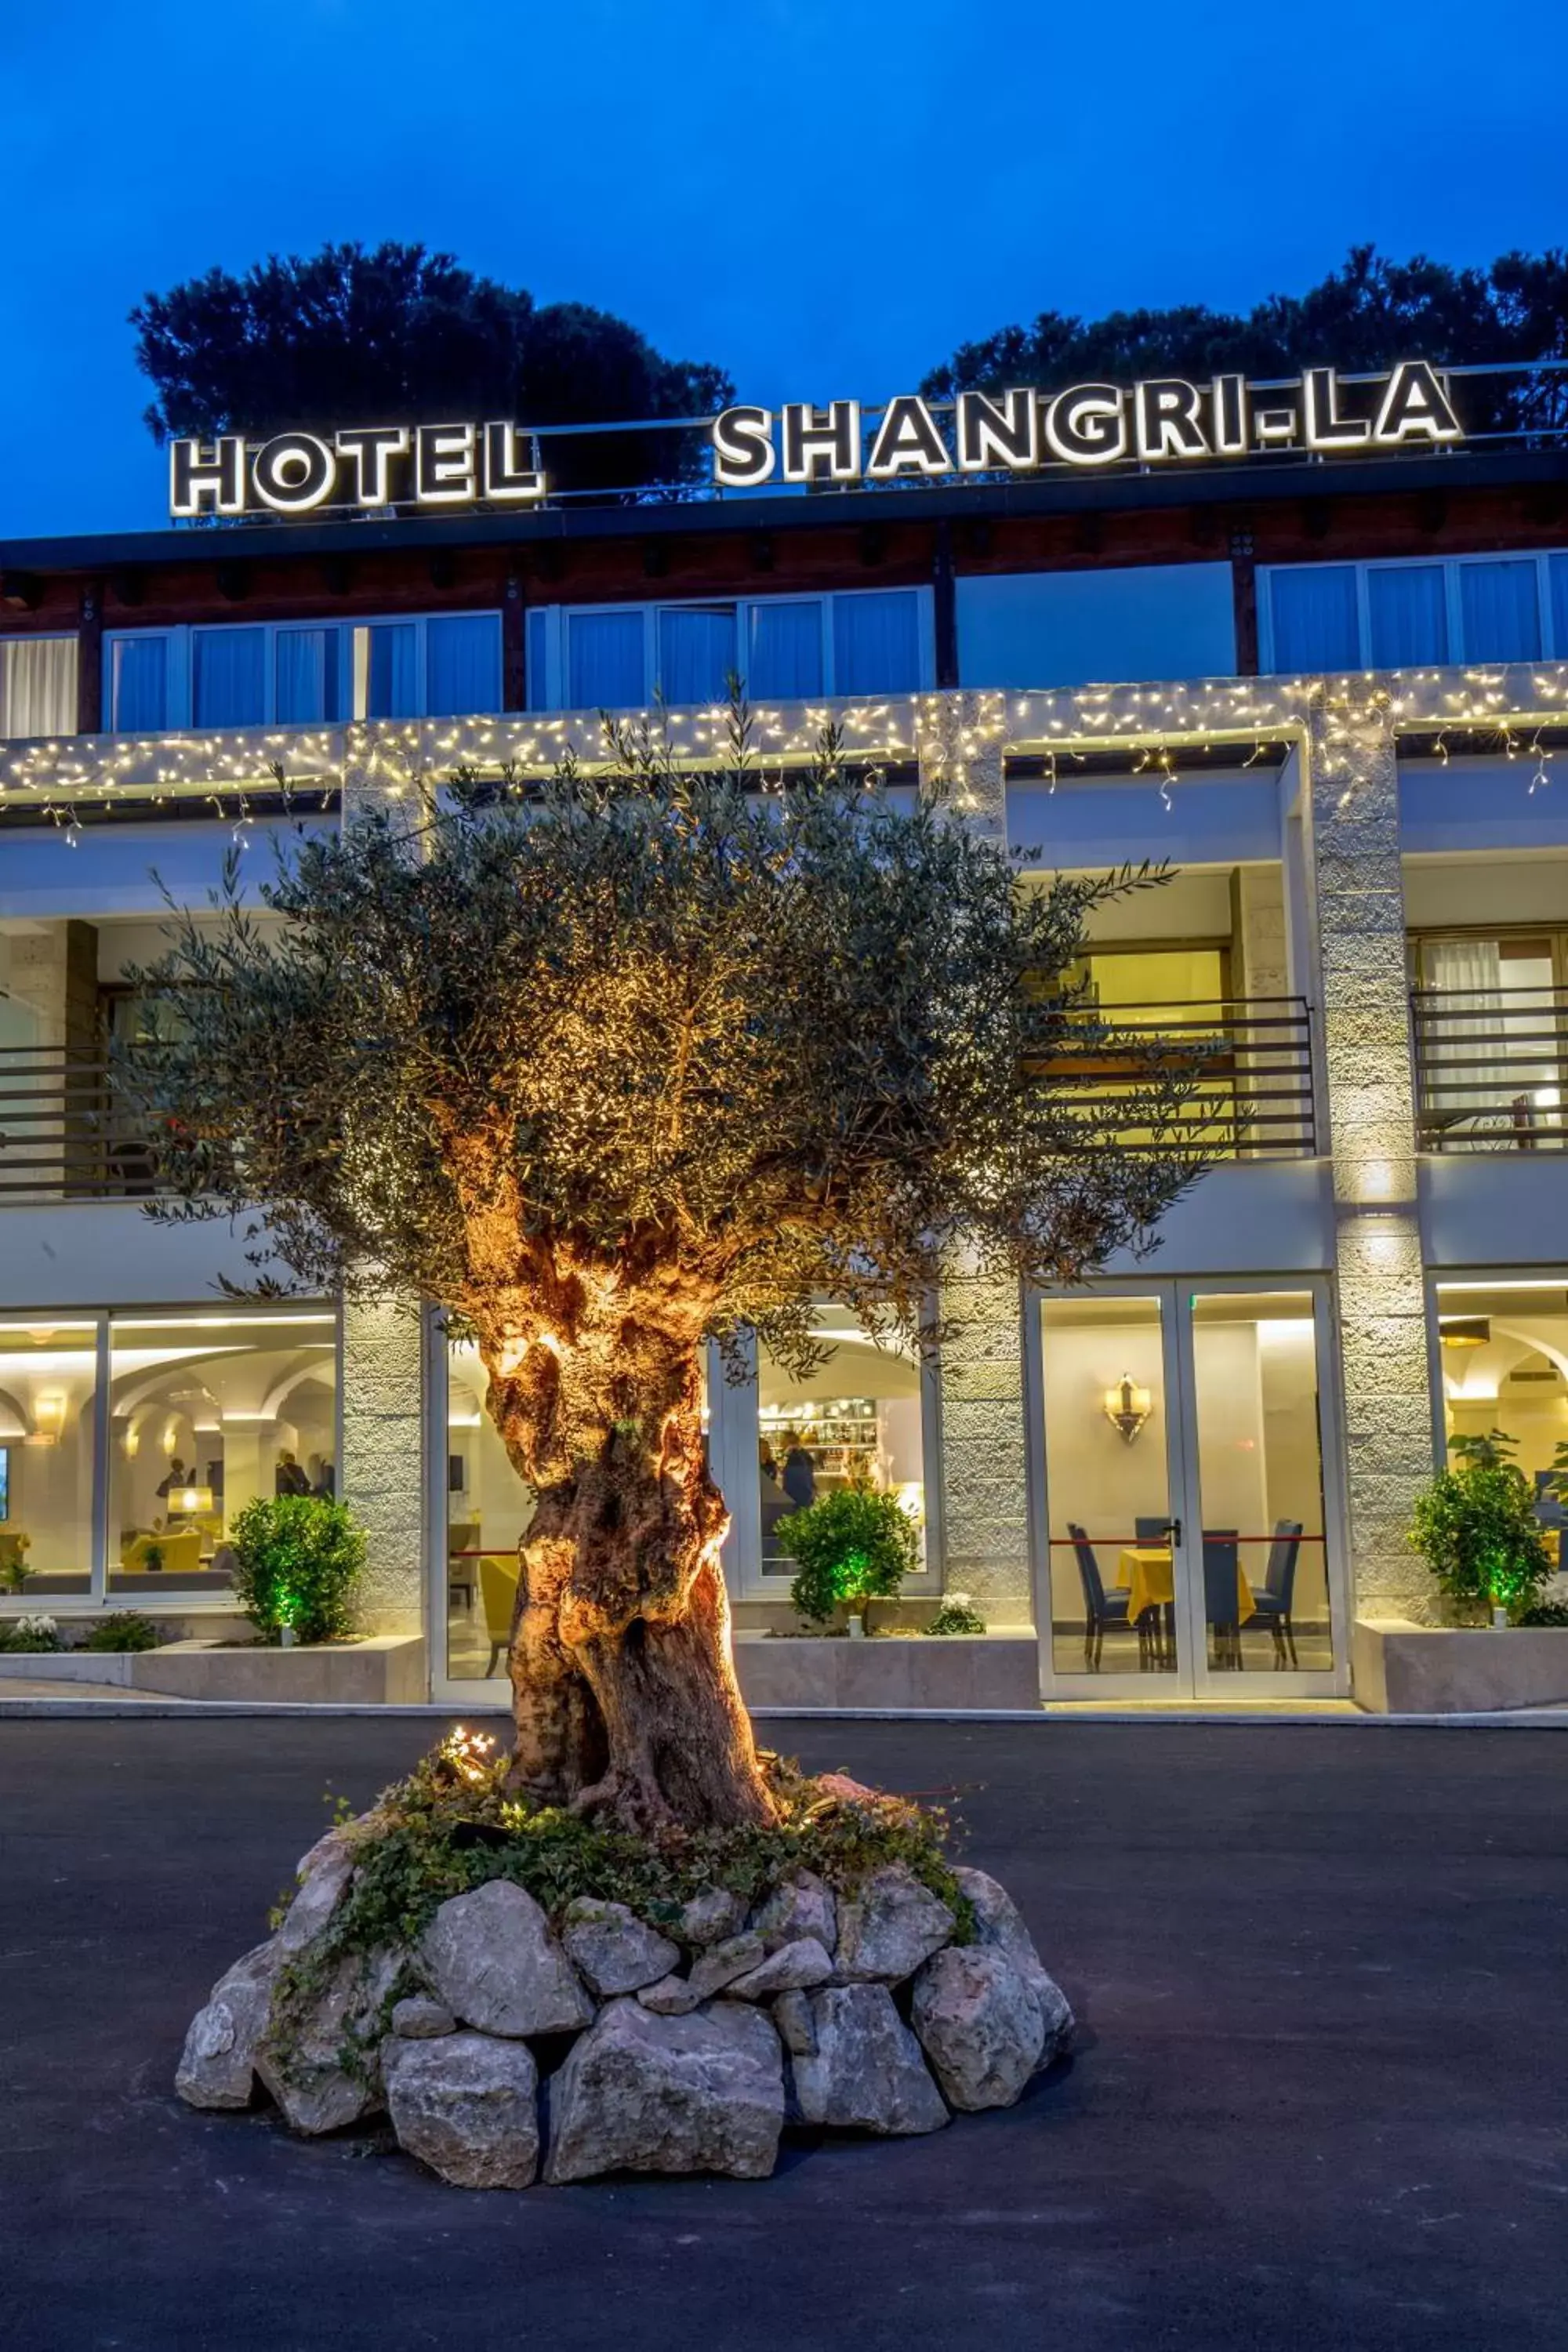 Property Building in Hotel Shangri-La Roma by OMNIA hotels